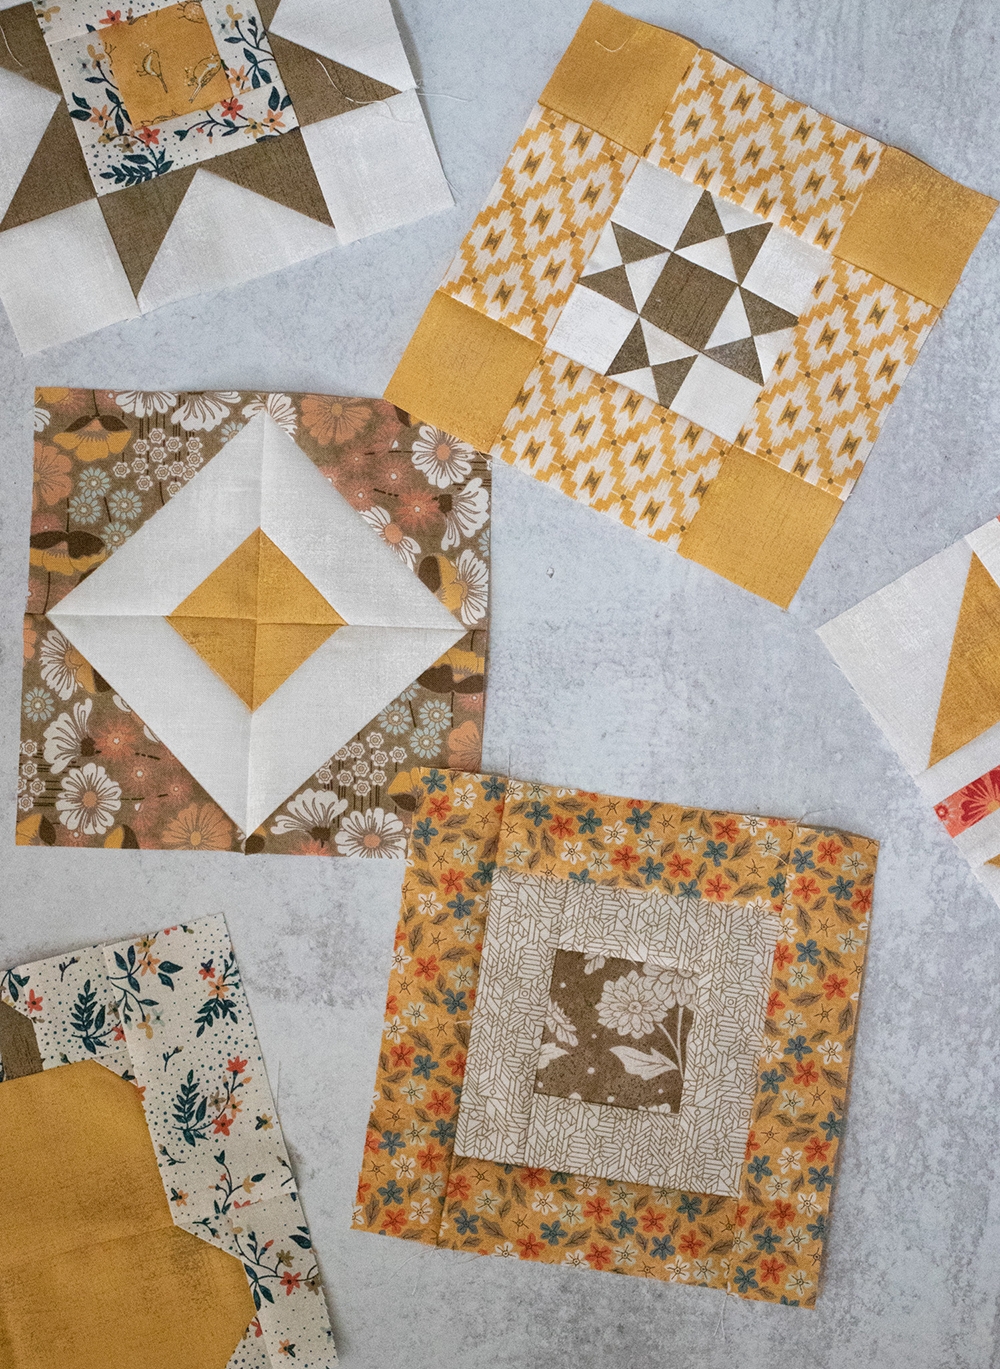 Sampler Spree Sew Along (Week 9). Check out Vanessa's blocks using Cider and Persimmon fabric by BasicGrey + her fall leaf quilt top layout.